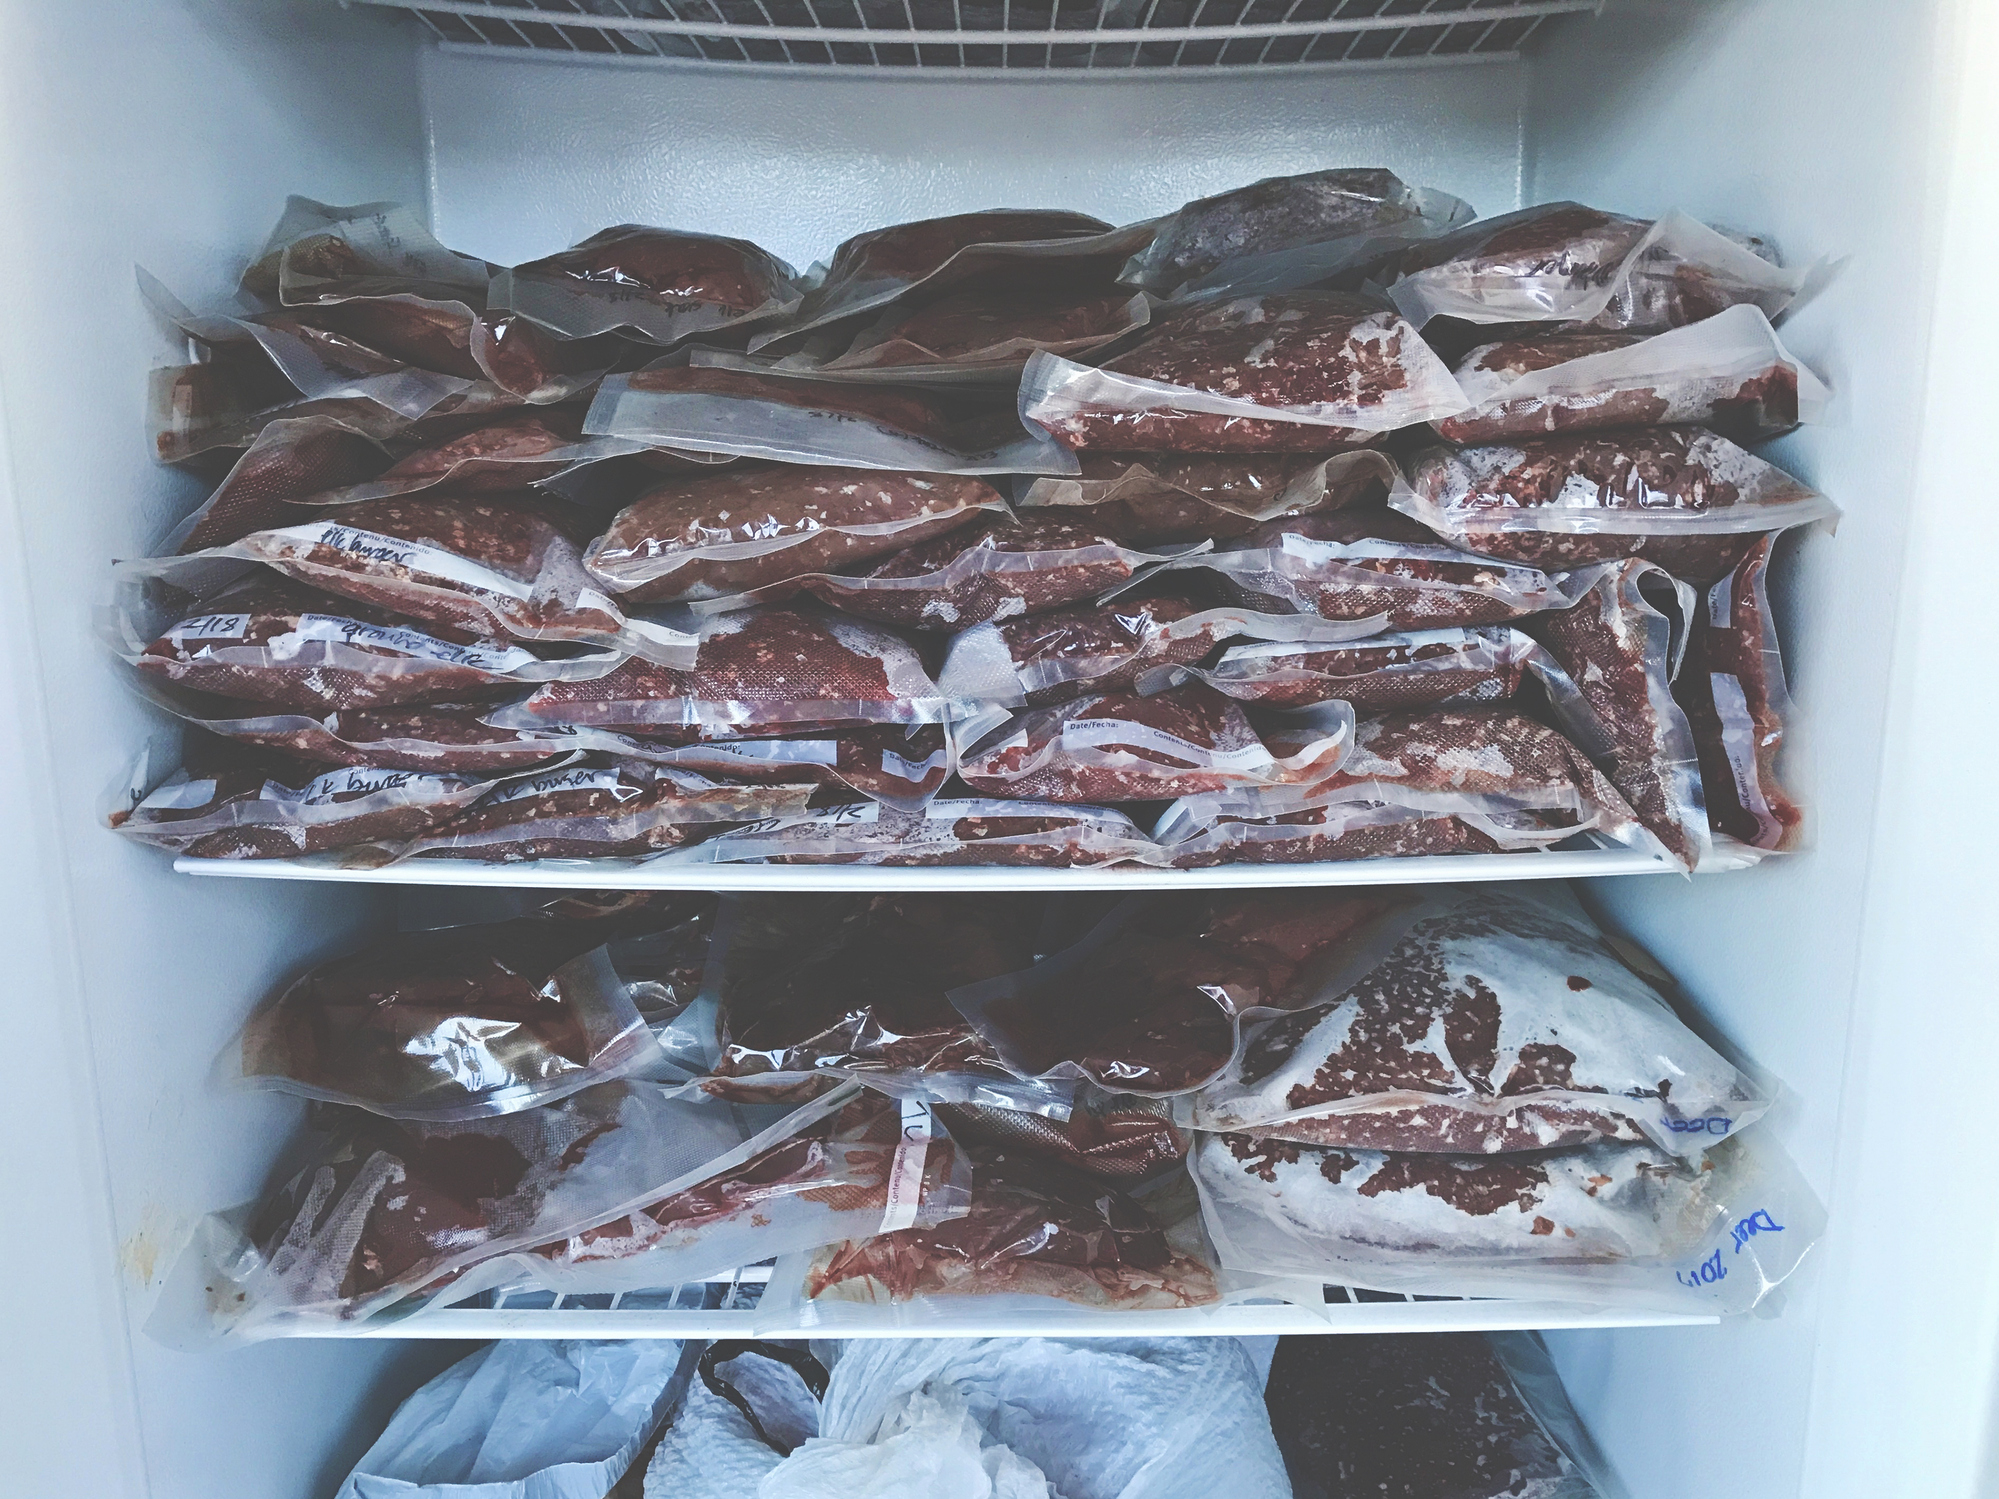 Packages of ground wild game meat are stacked on shelves in a freezer